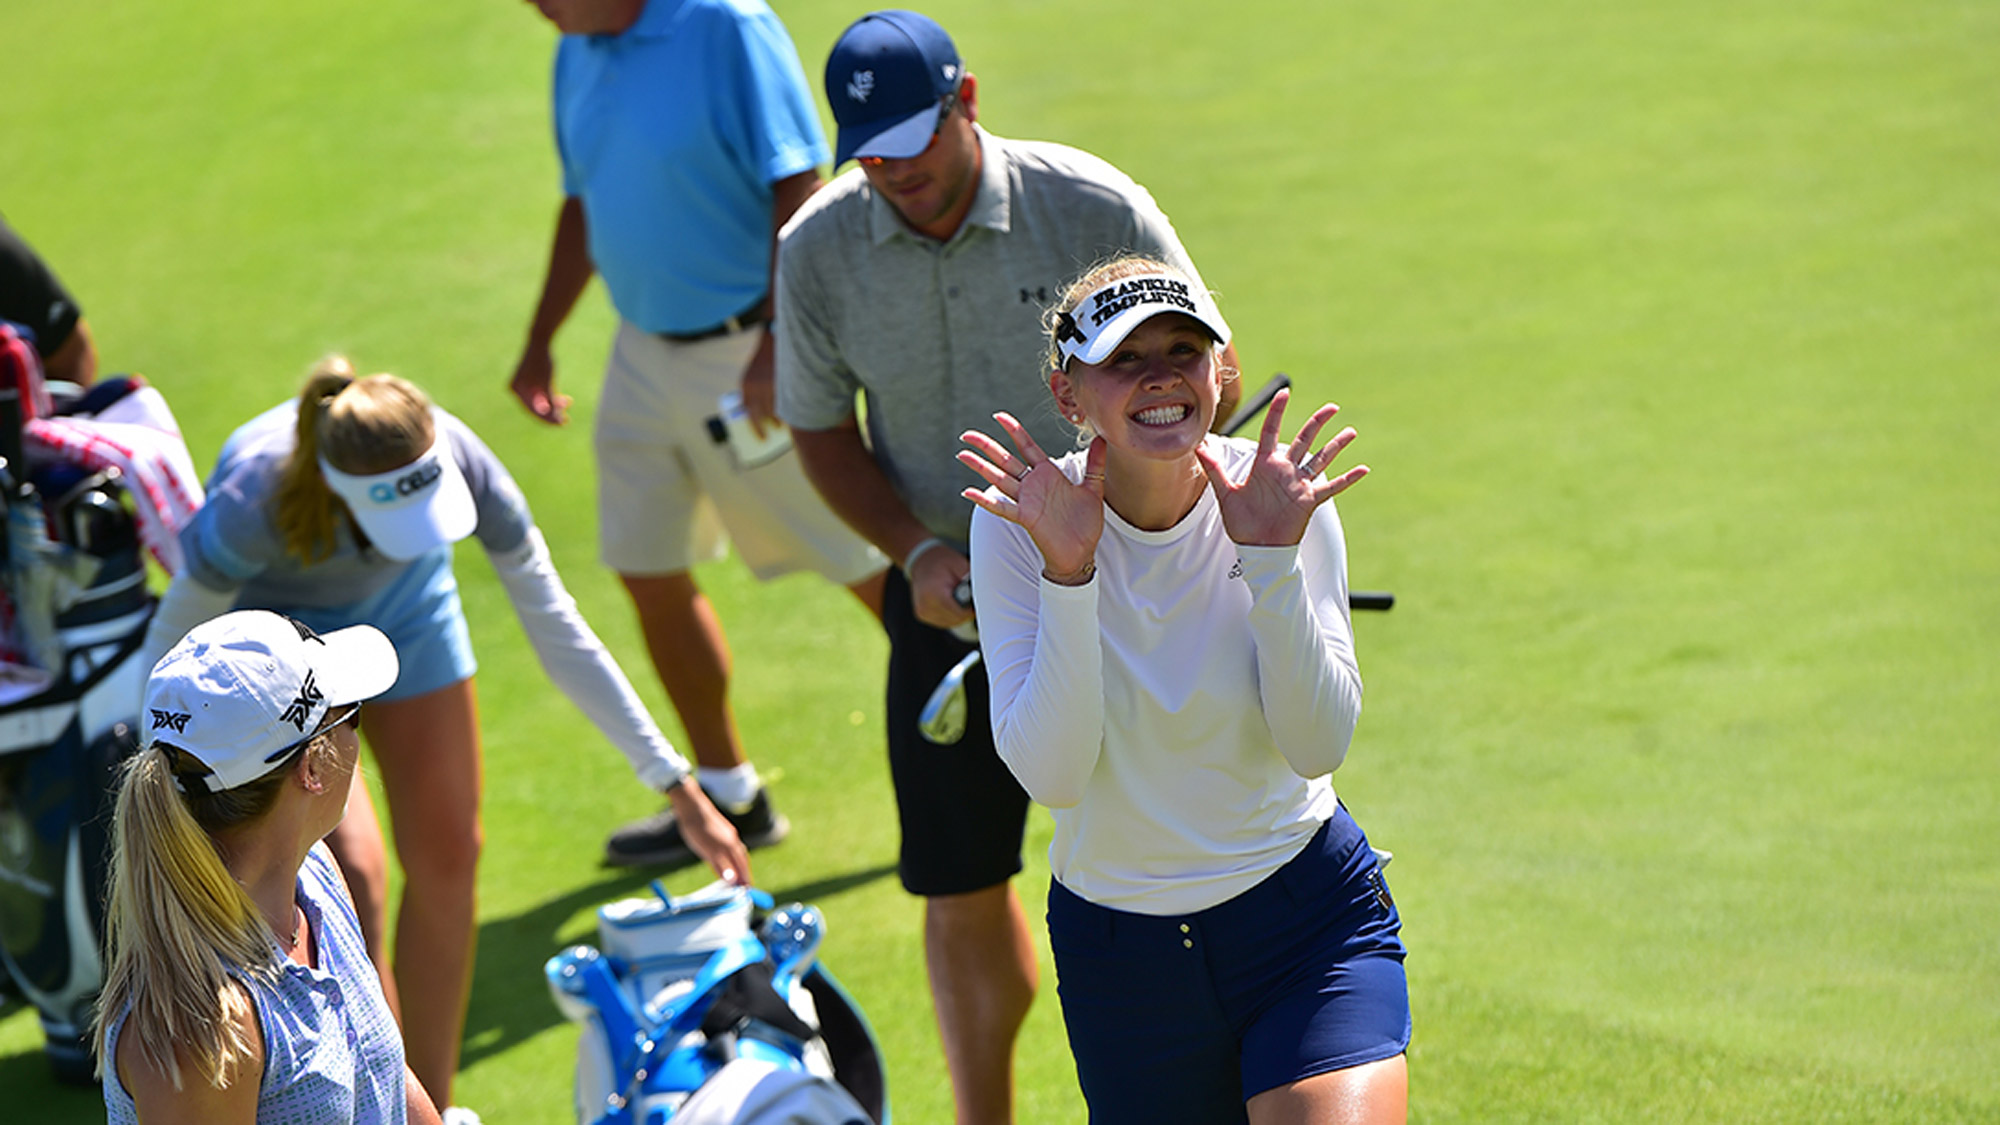 Jessica Korda Makes a Funny Face During a Practice Round